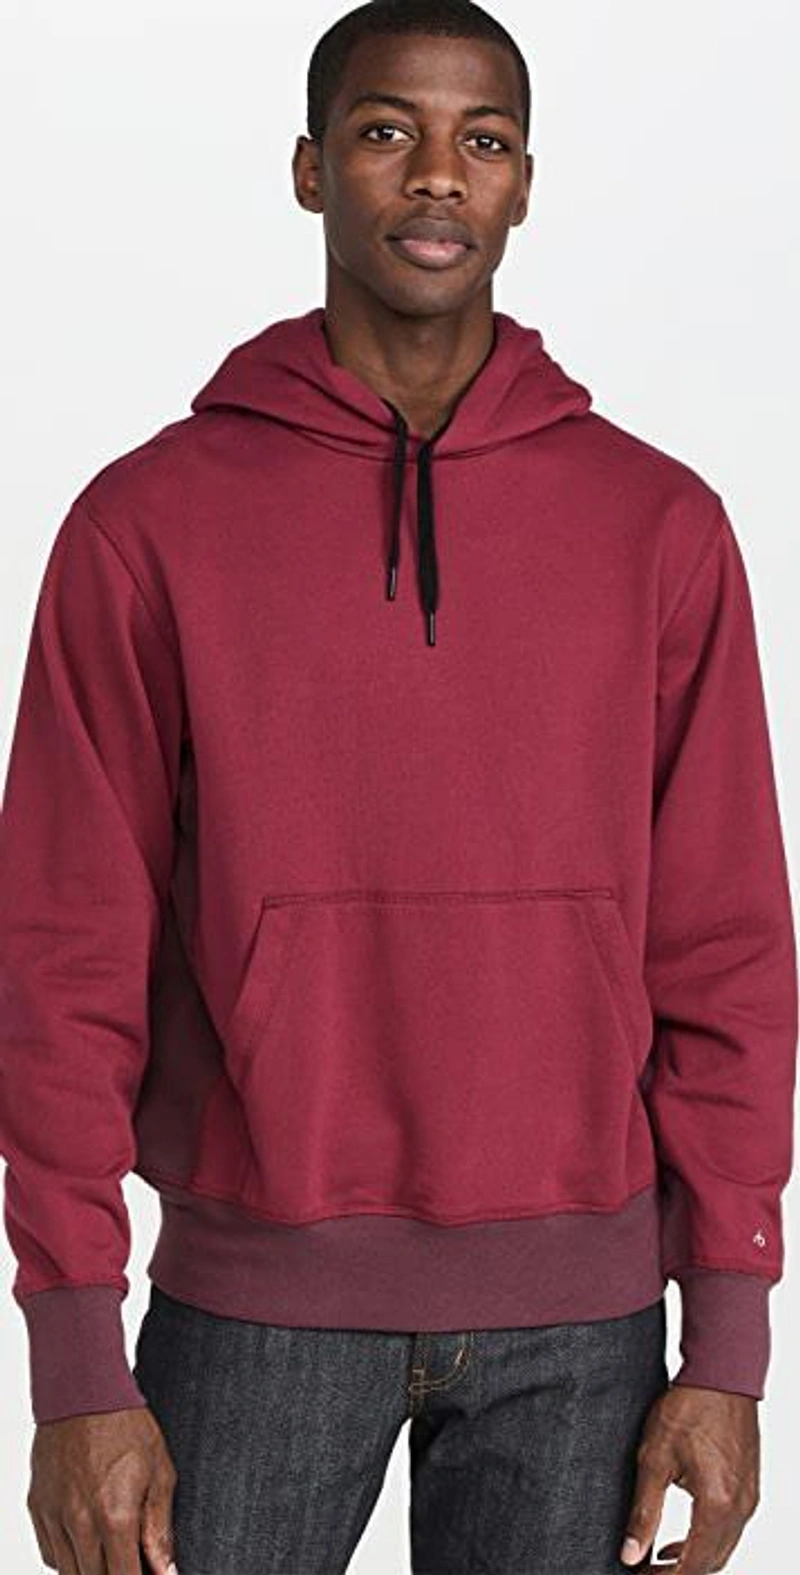 shopbop.com's Posts | 搭配: Rag & Bone City Hoodie In Violet；Naked & Famous Weird Guy Left Hand Twill Selvedge Pants